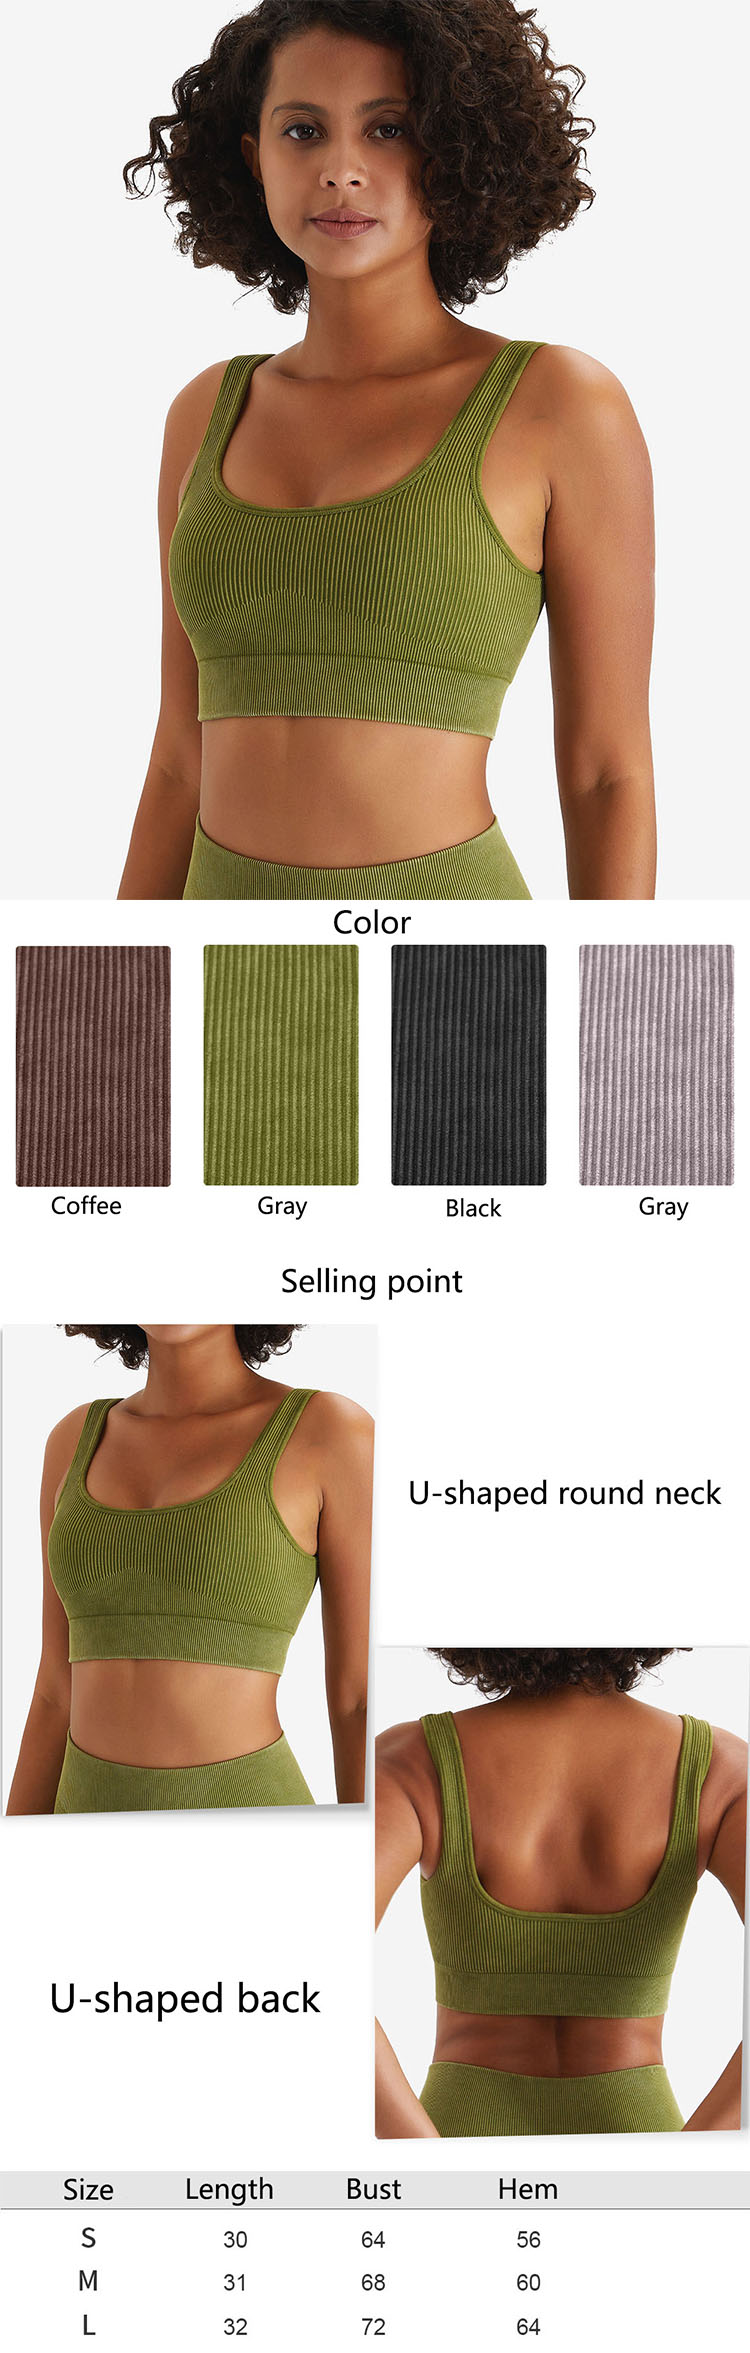 The back of minimizer sports bra generally plays a role in stabilizing the position of the bra